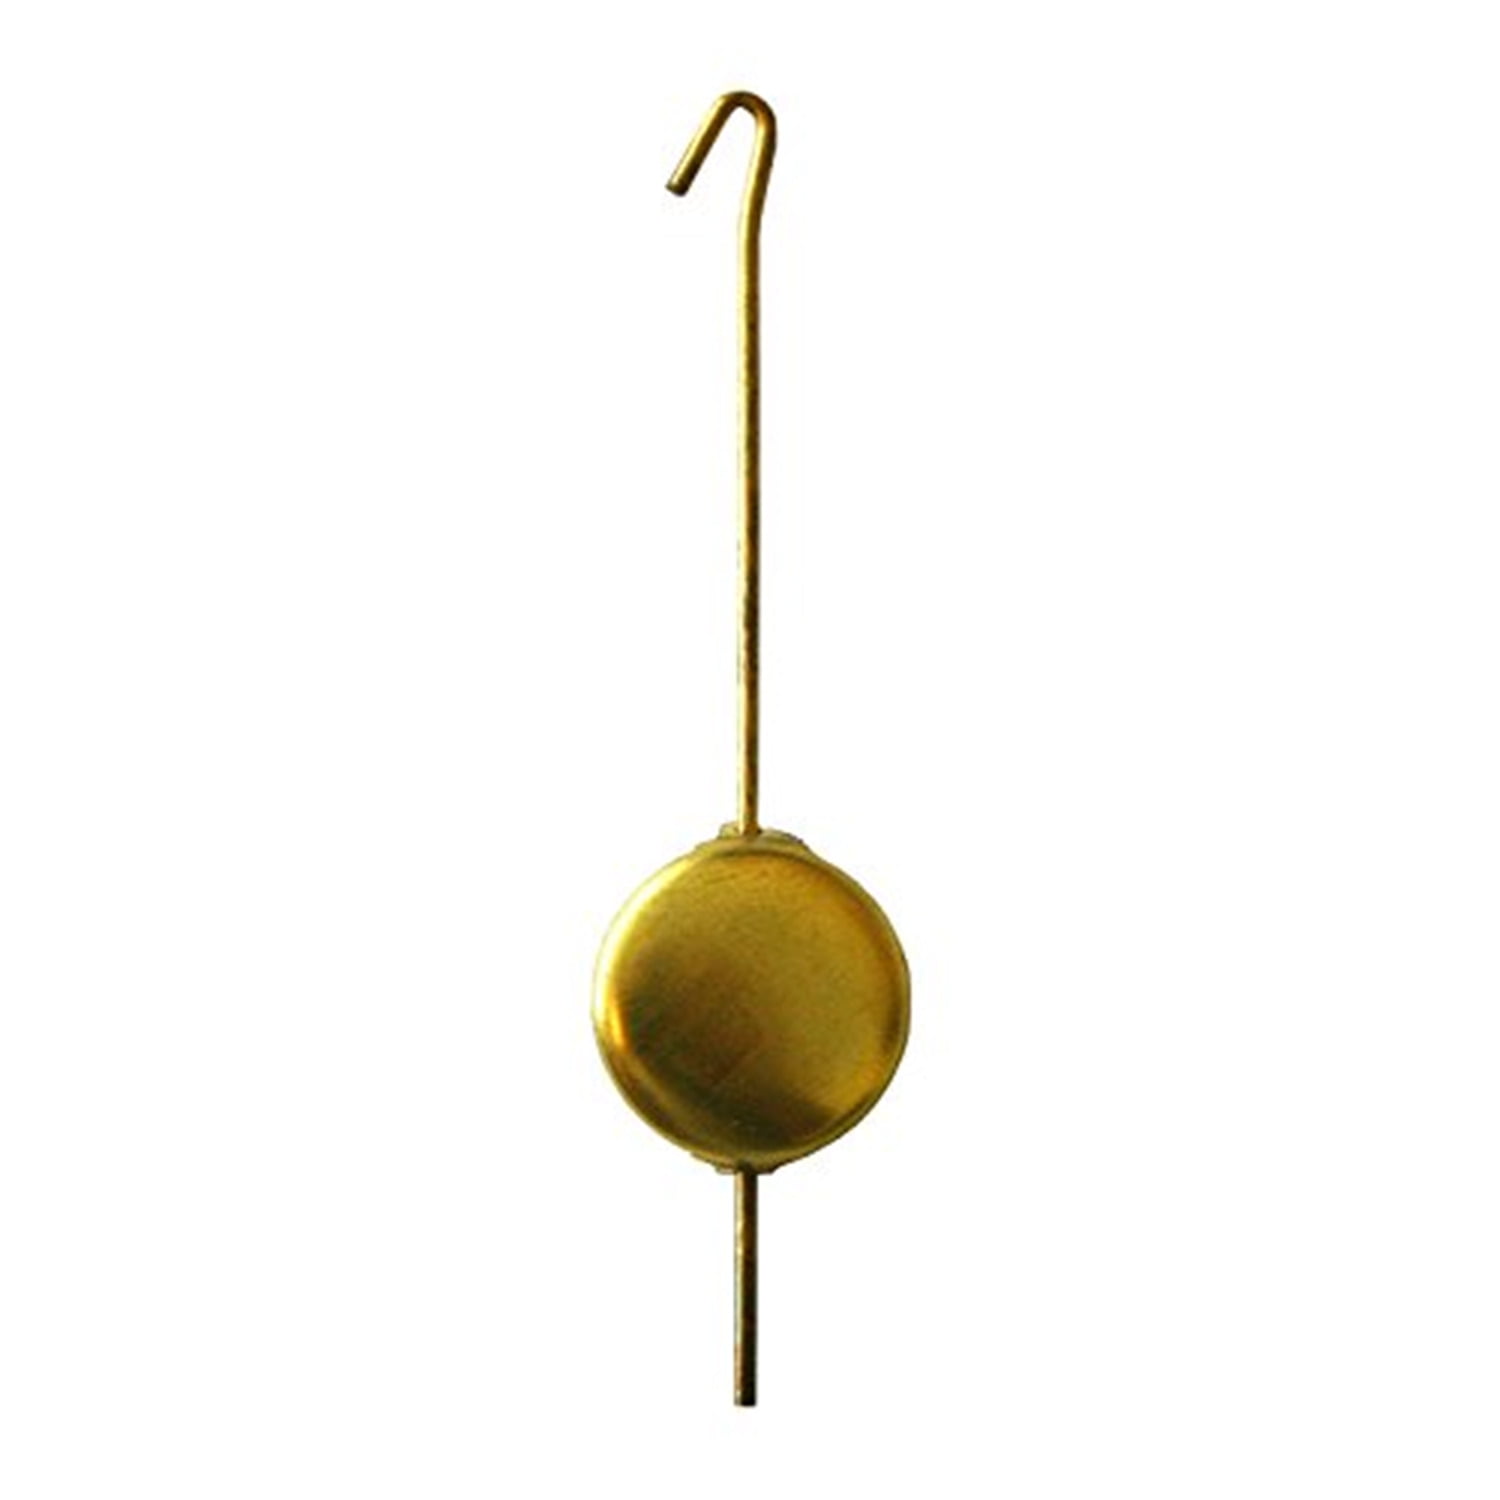 Regpend Engstler Pendulum For Wind - Up Small Clocks